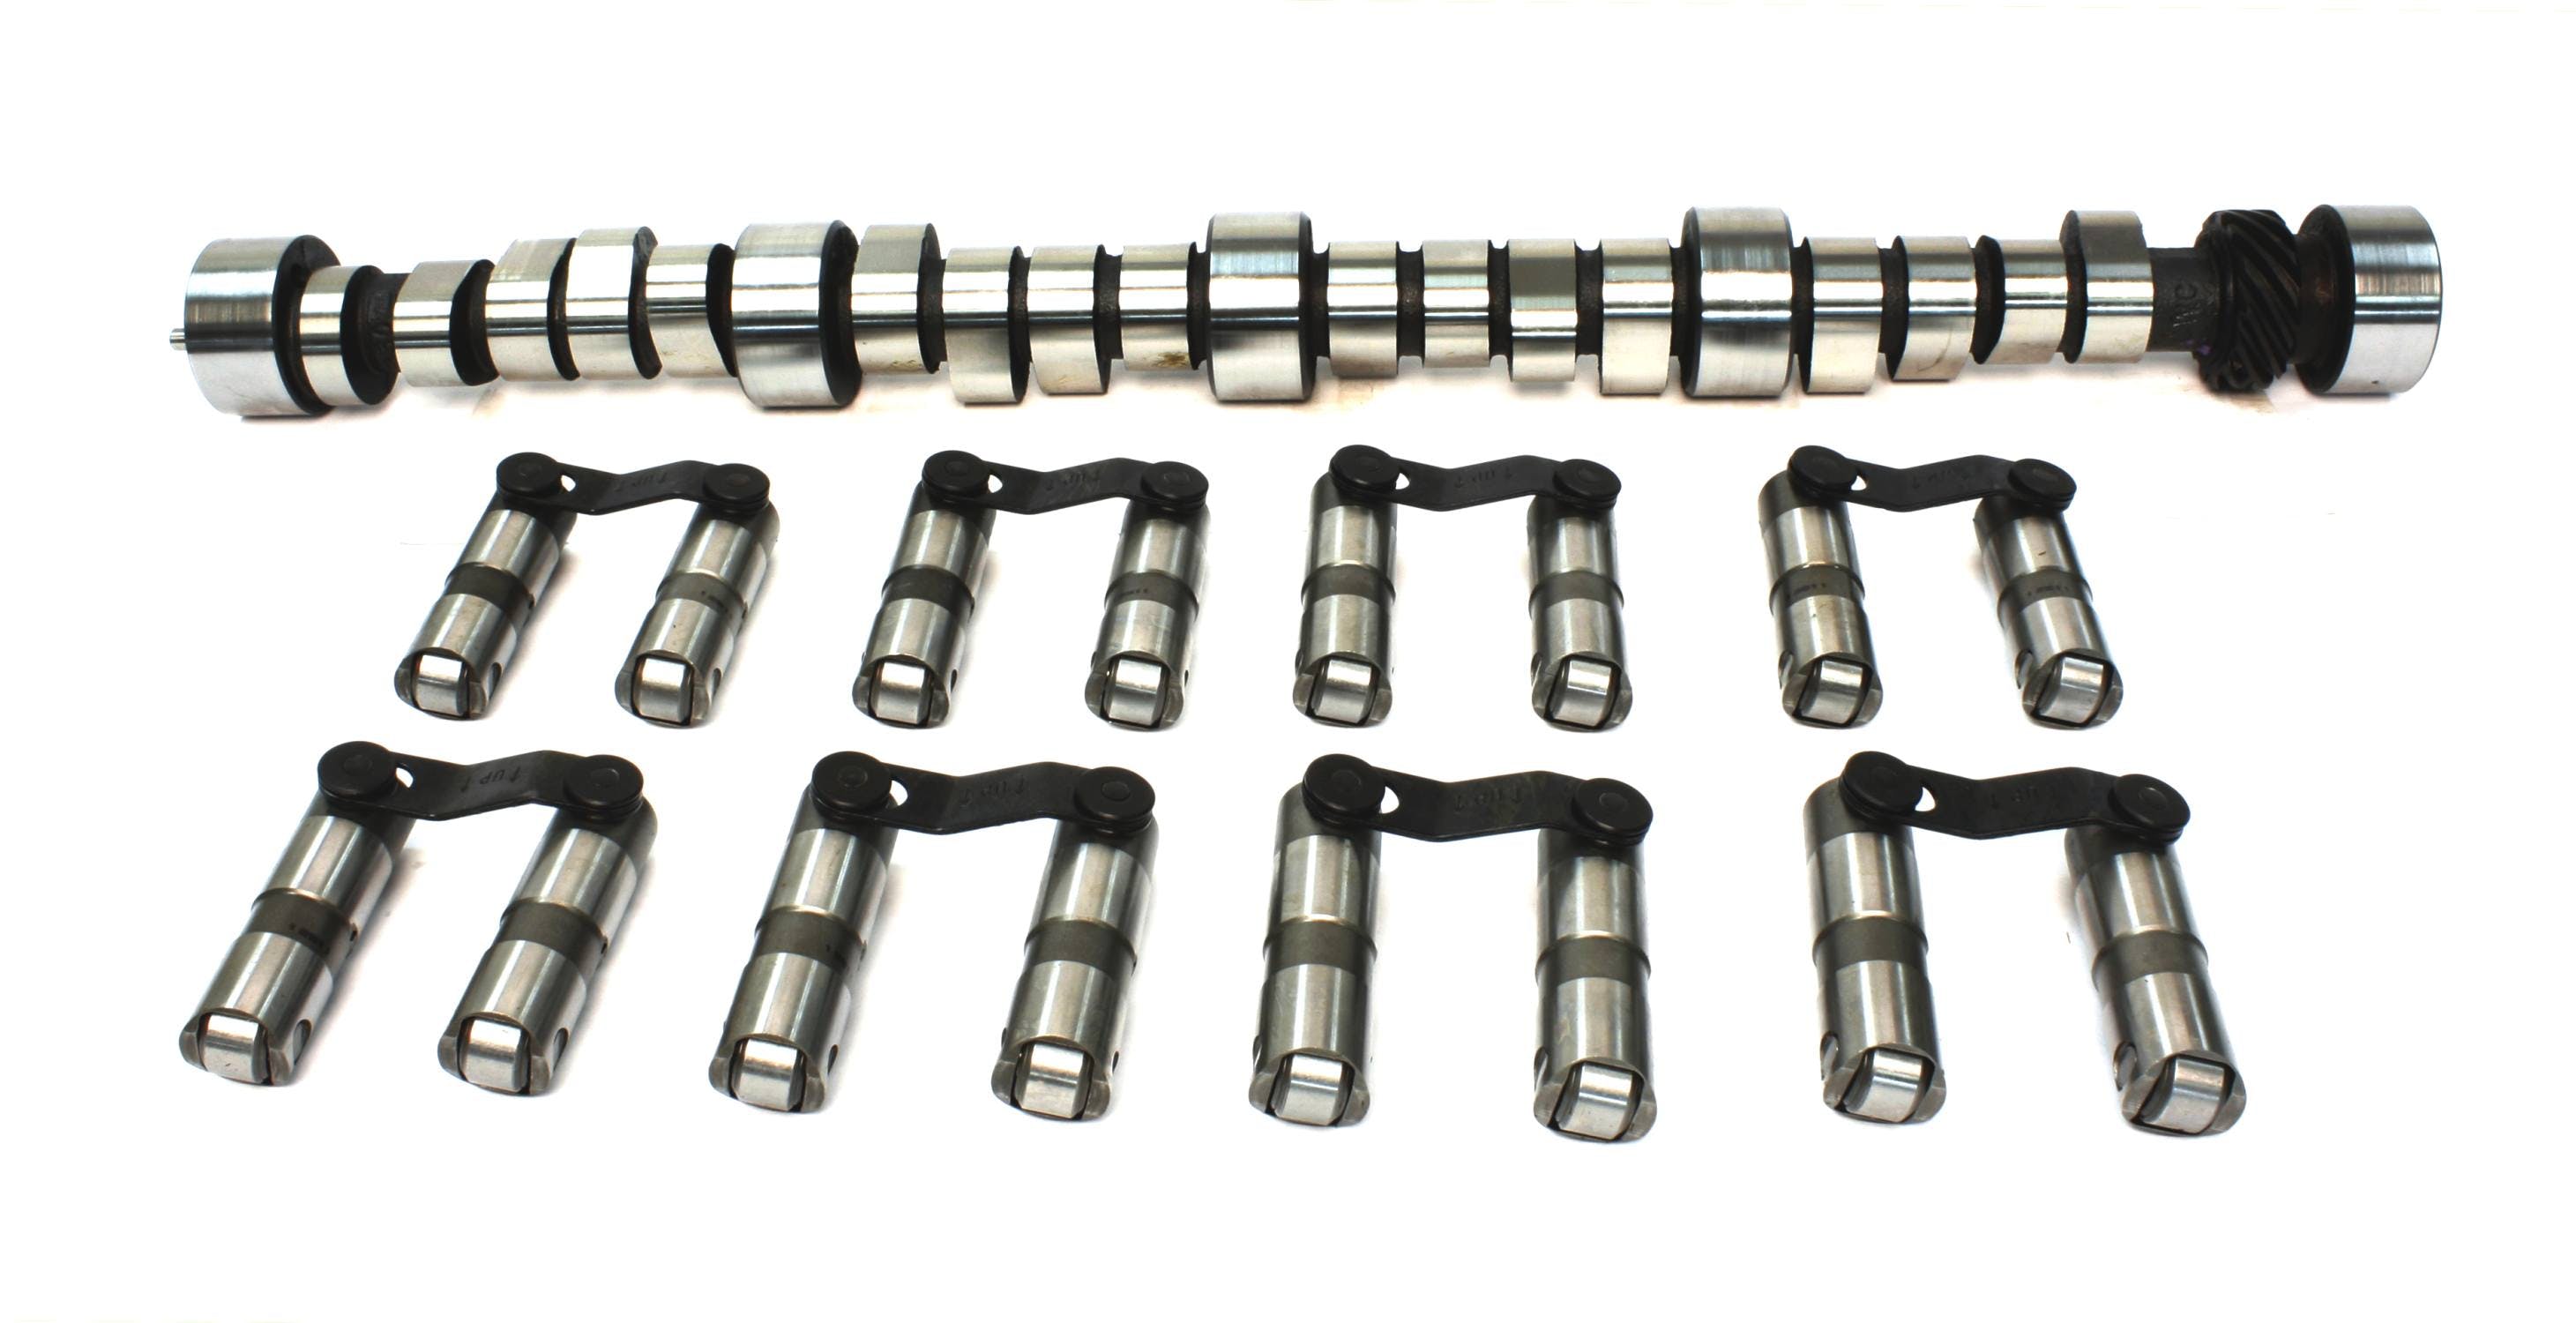 Competition Cams CL11-410-8 MAGNUM 206/206 HYDRAULIC ROLLER CAM AND LIFTER KIT CHEVROLET BIG BLOCK 396-454